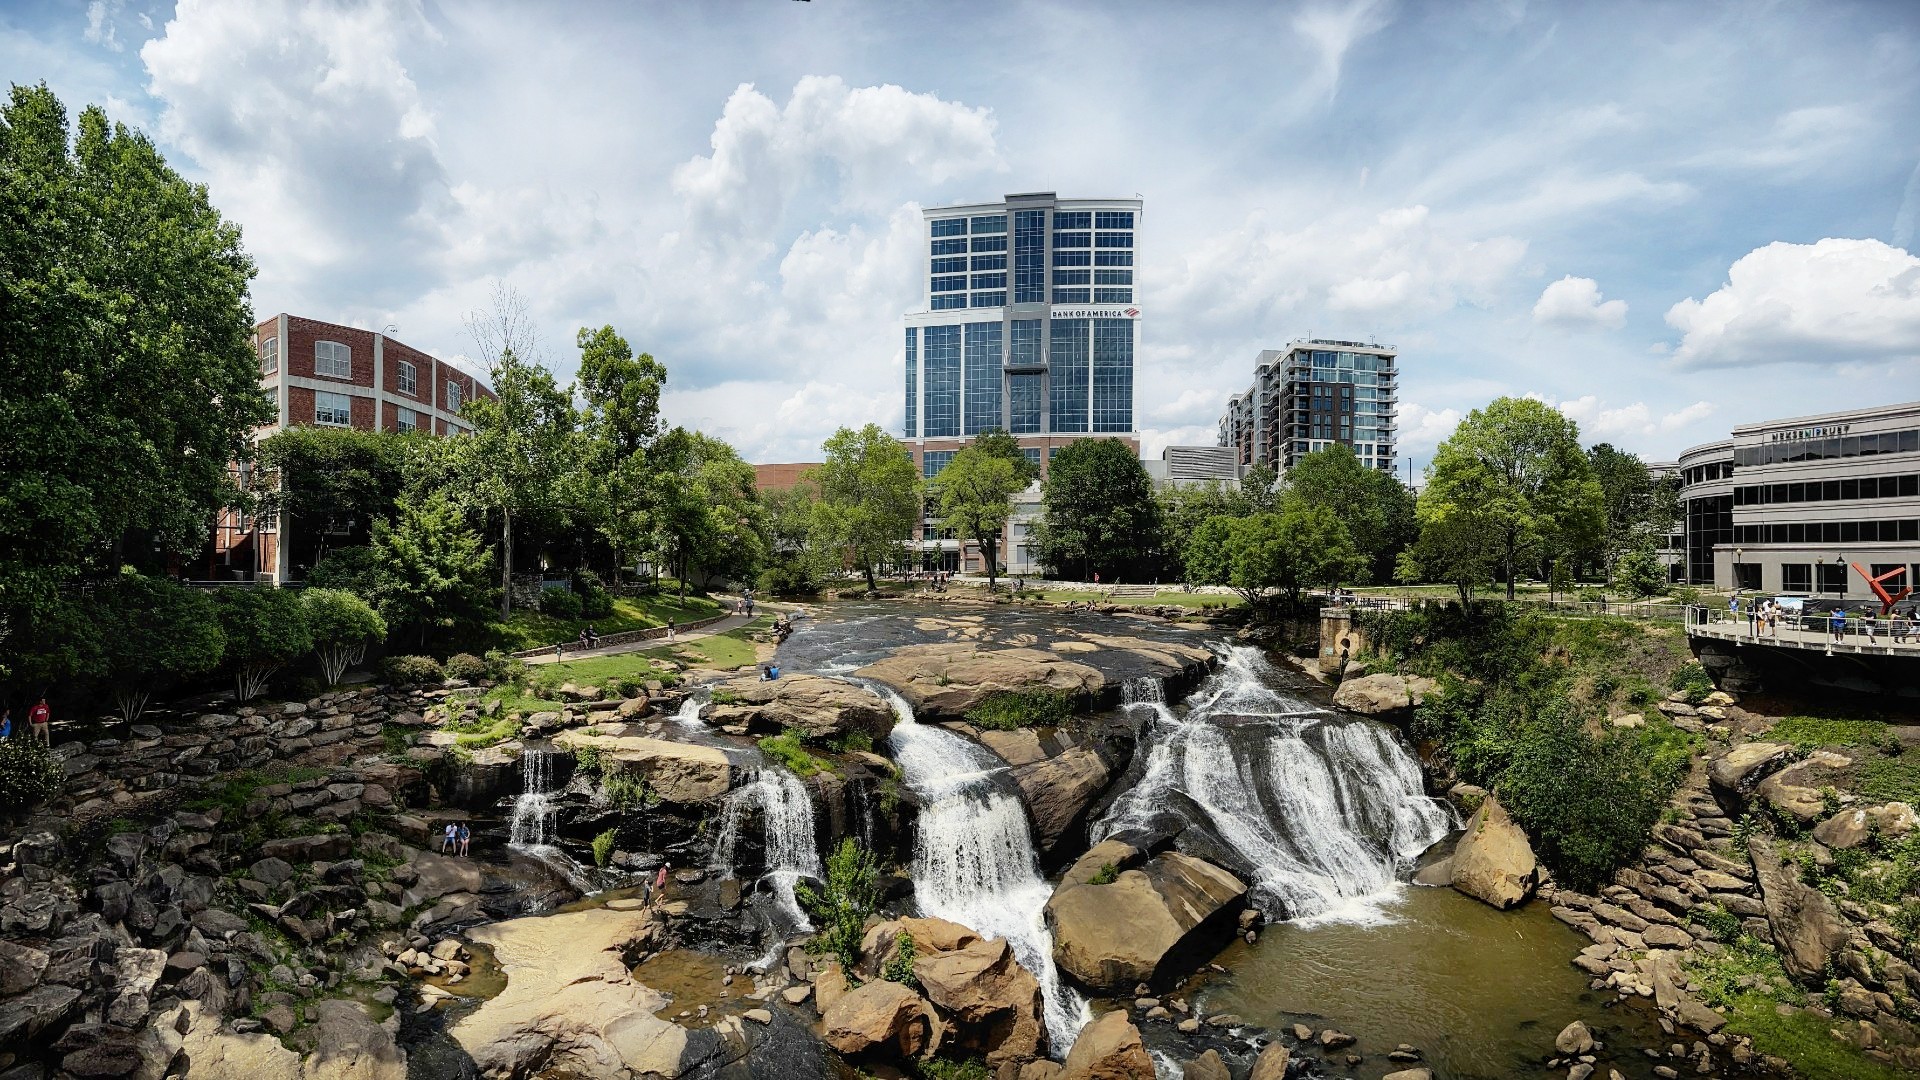 Park area of a downtown city with a cascading waterfall and green trees